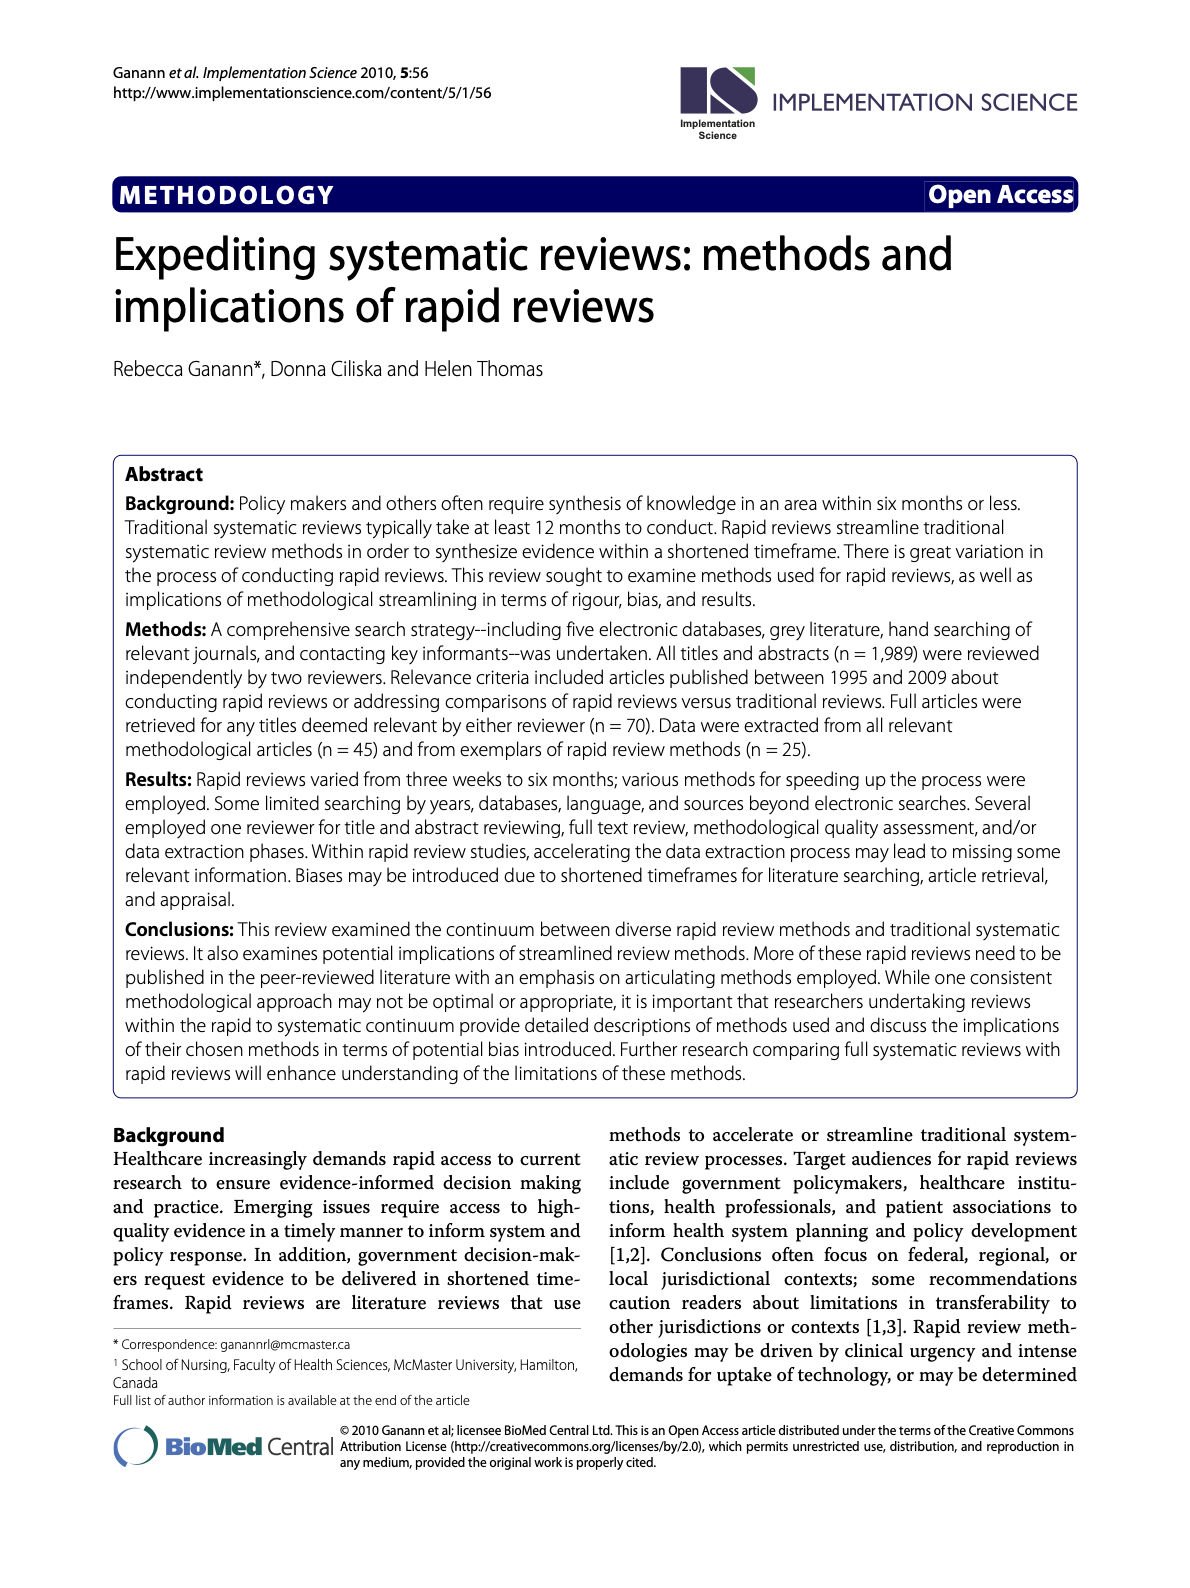 Expediting Systematic Reviews: Methods and Implications of Rapid Reviews